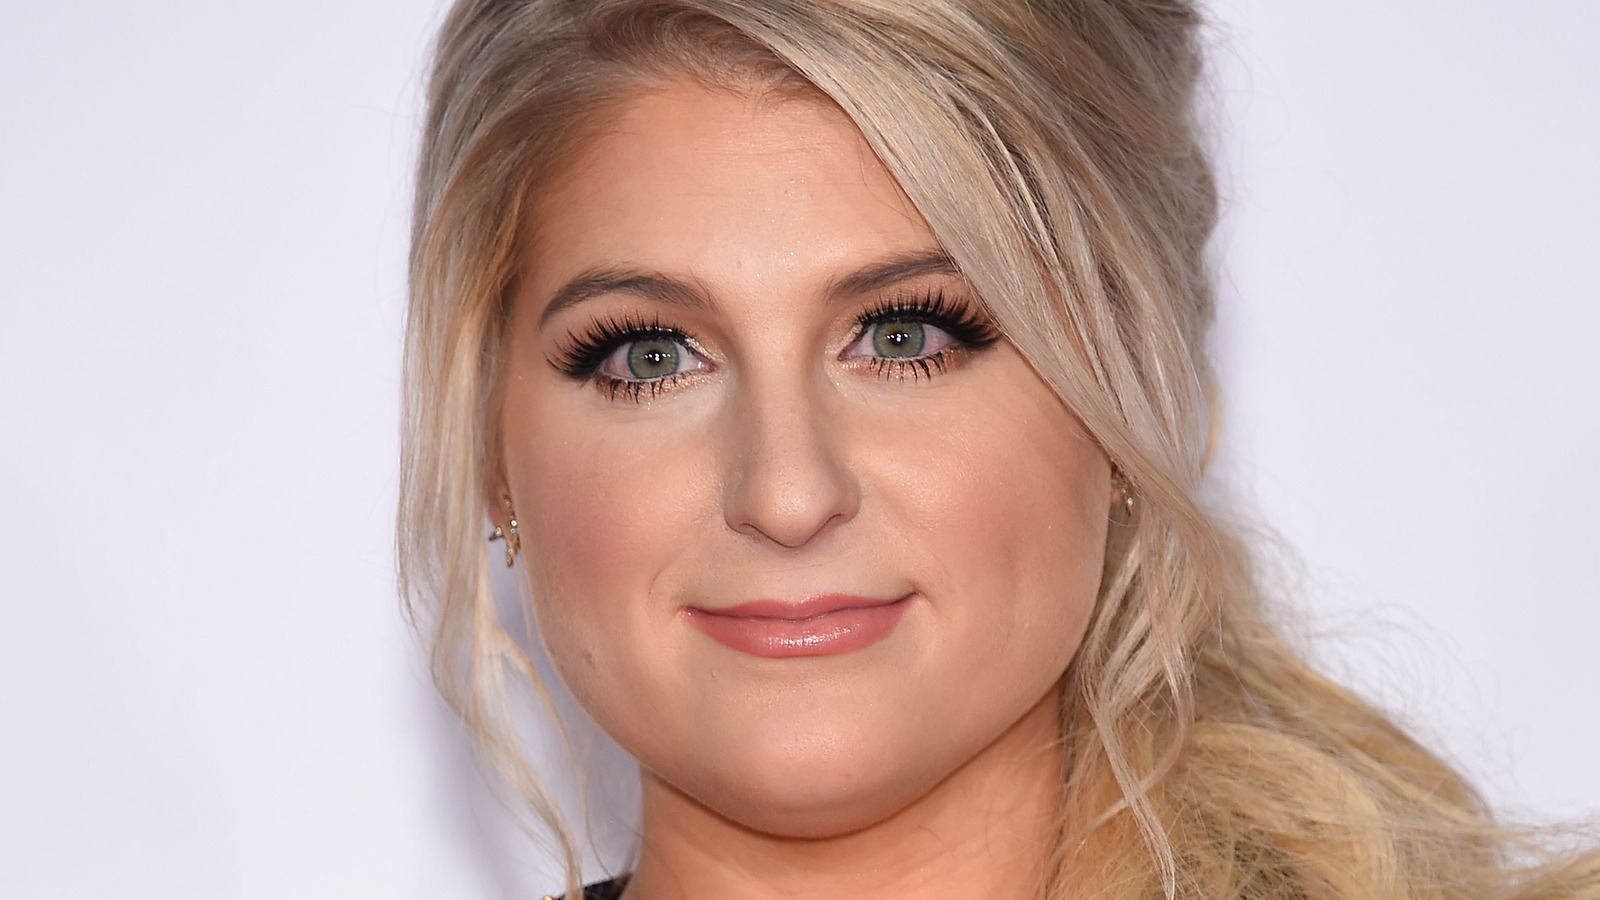 Meghan Trainor Stars in Super Bowl Commercial for Pringles While